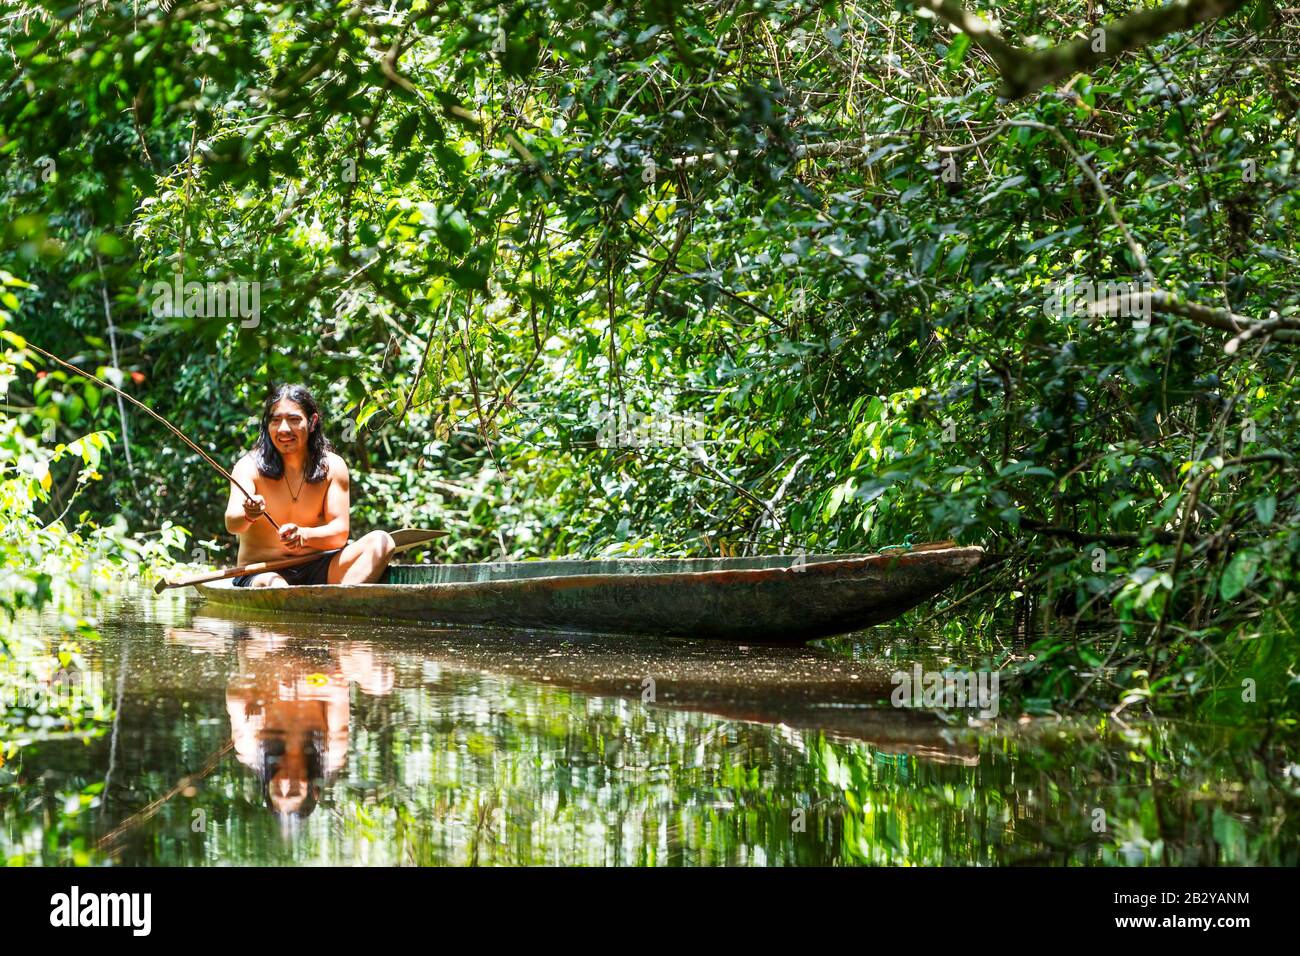 Aboriginal Grown Man On Ordinary Wooden Boat Shredded From A Single Tree Cruising Murky Waters Of Ecuadorian Amazonian Primary Rain Forest Stock Photo